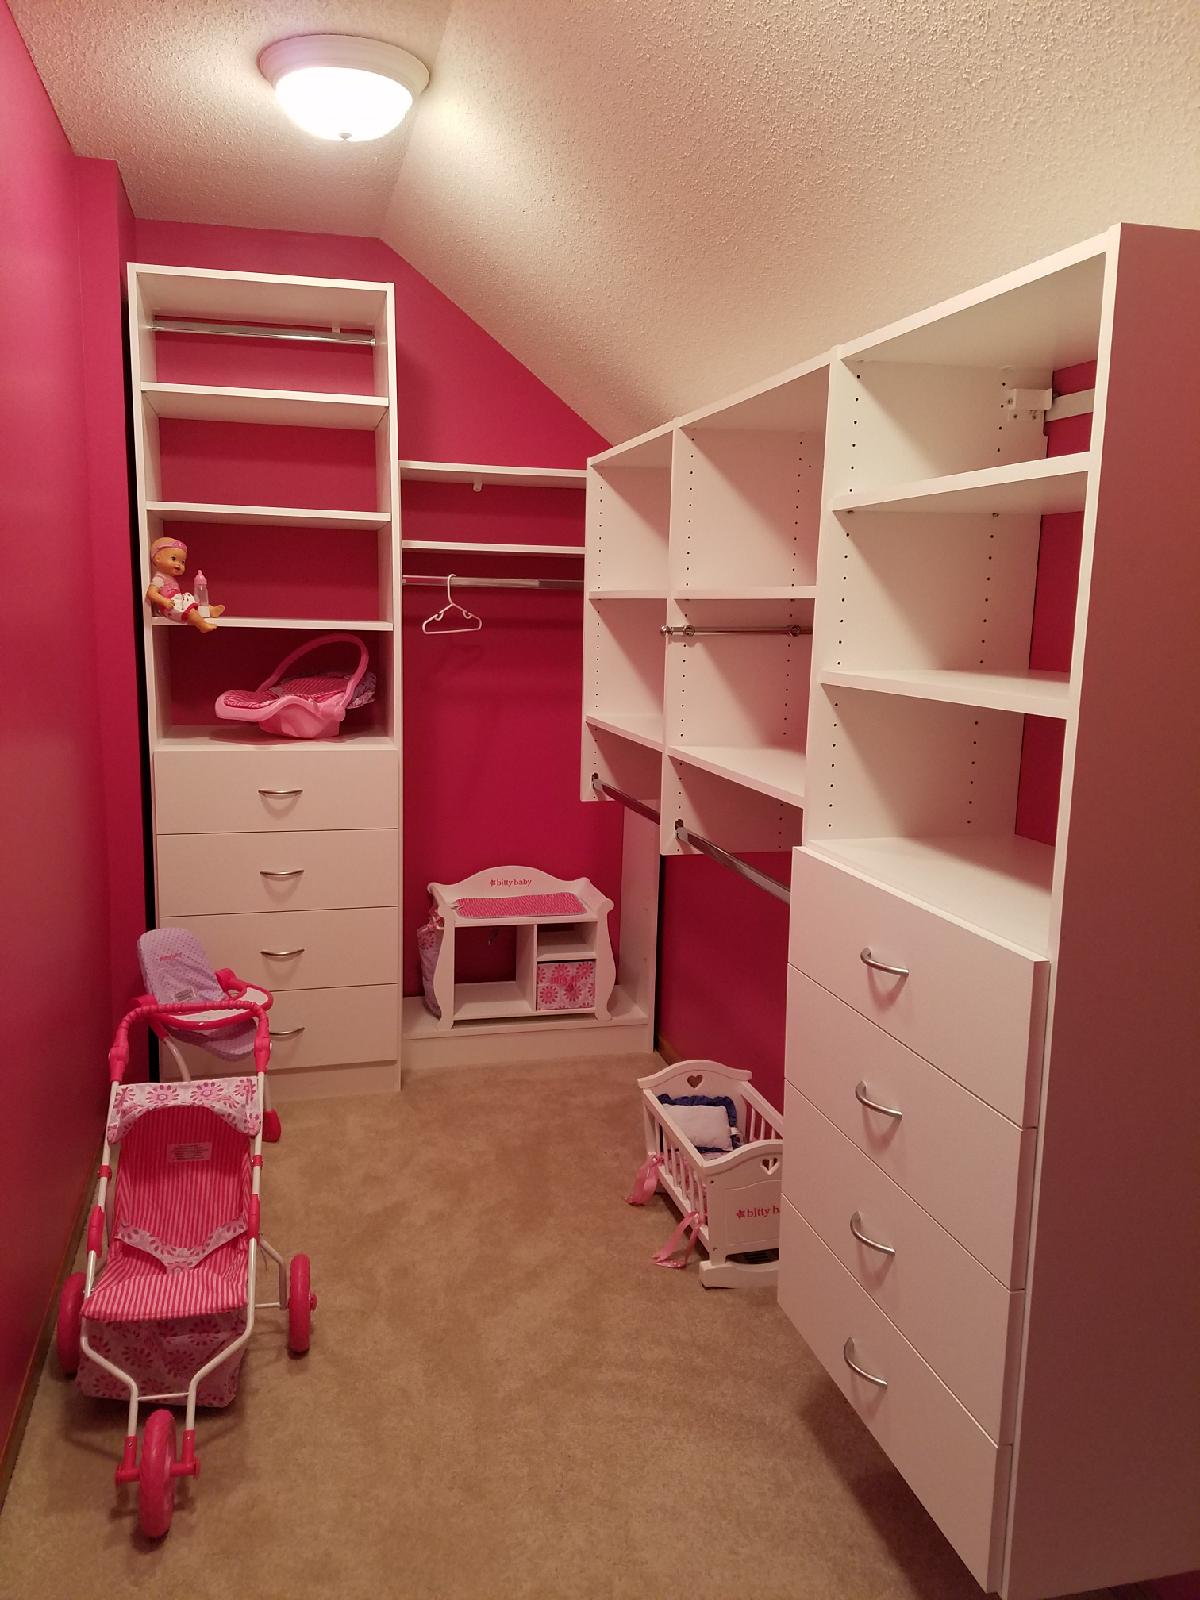 Creativity at Play in Children's Room Projects | Custom Closet